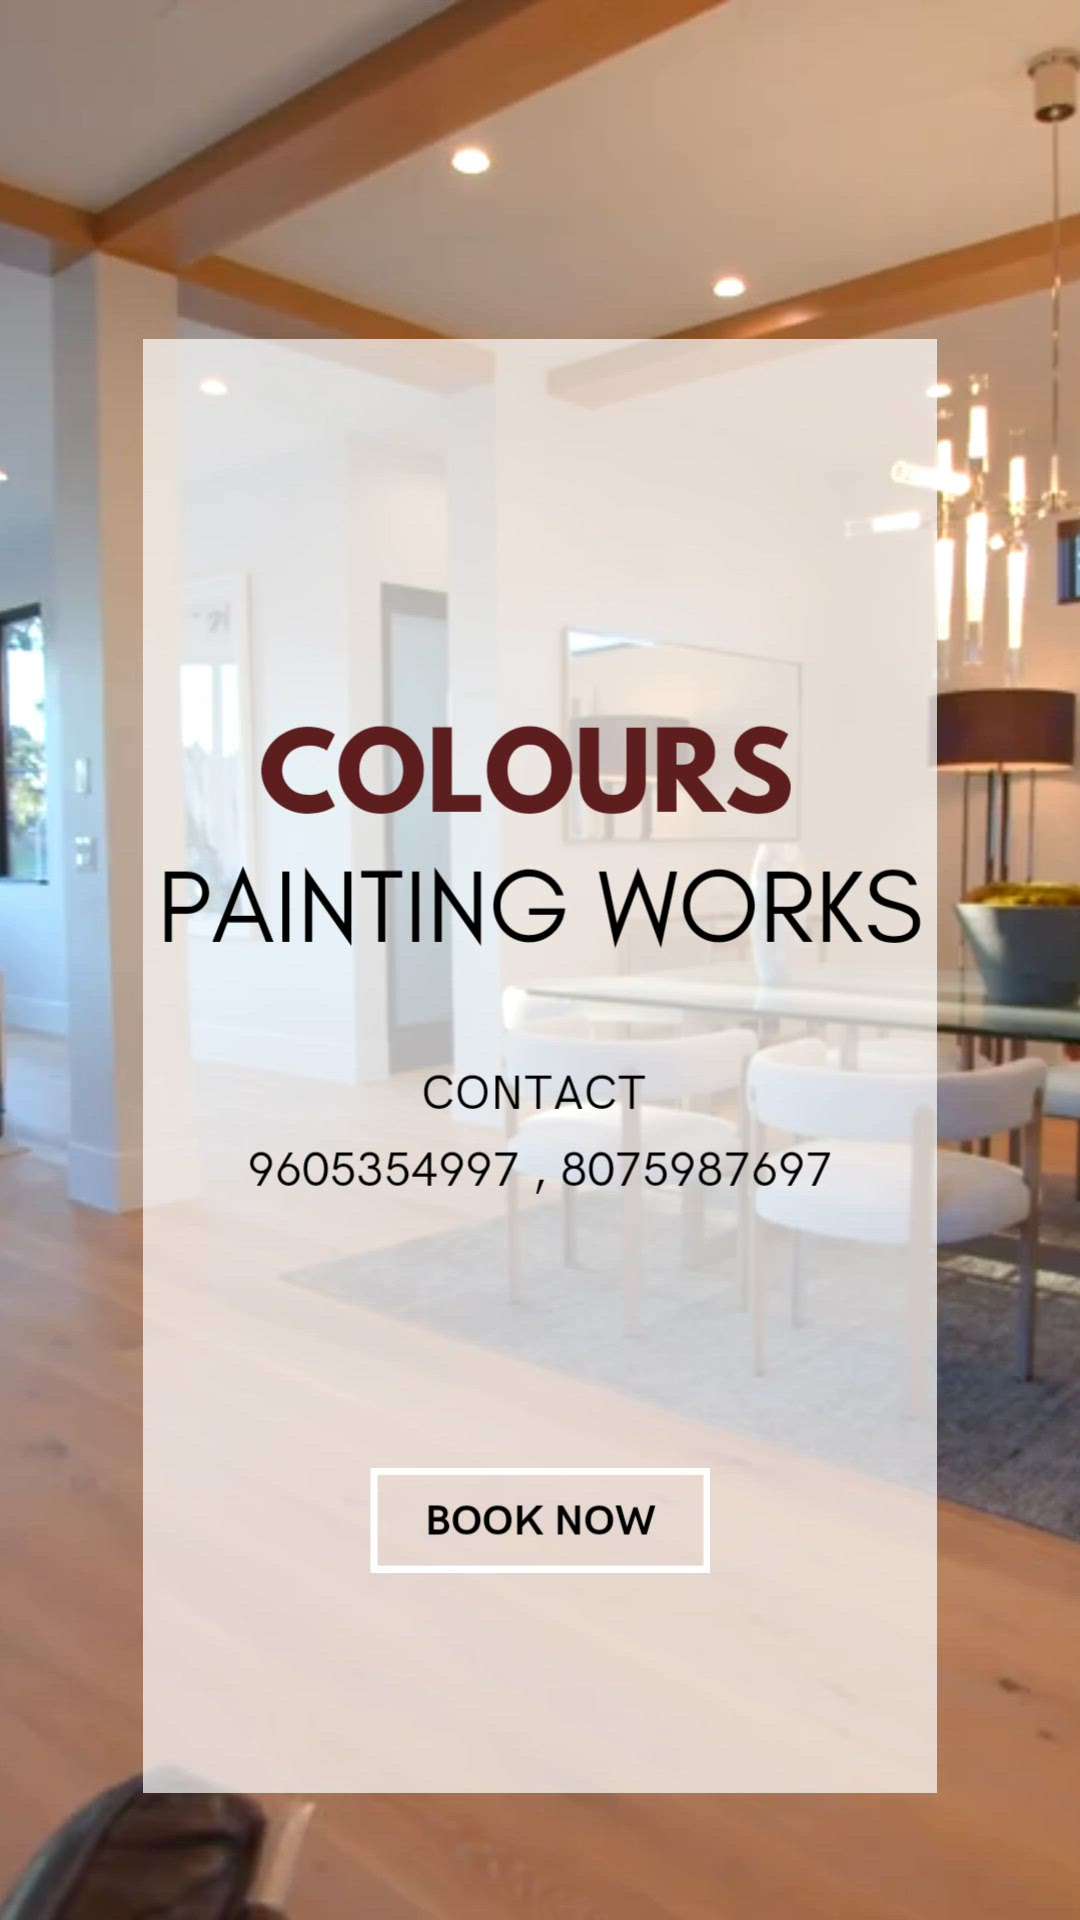 colours painting works 
9605354997
#TexturePainting #interiorpainting